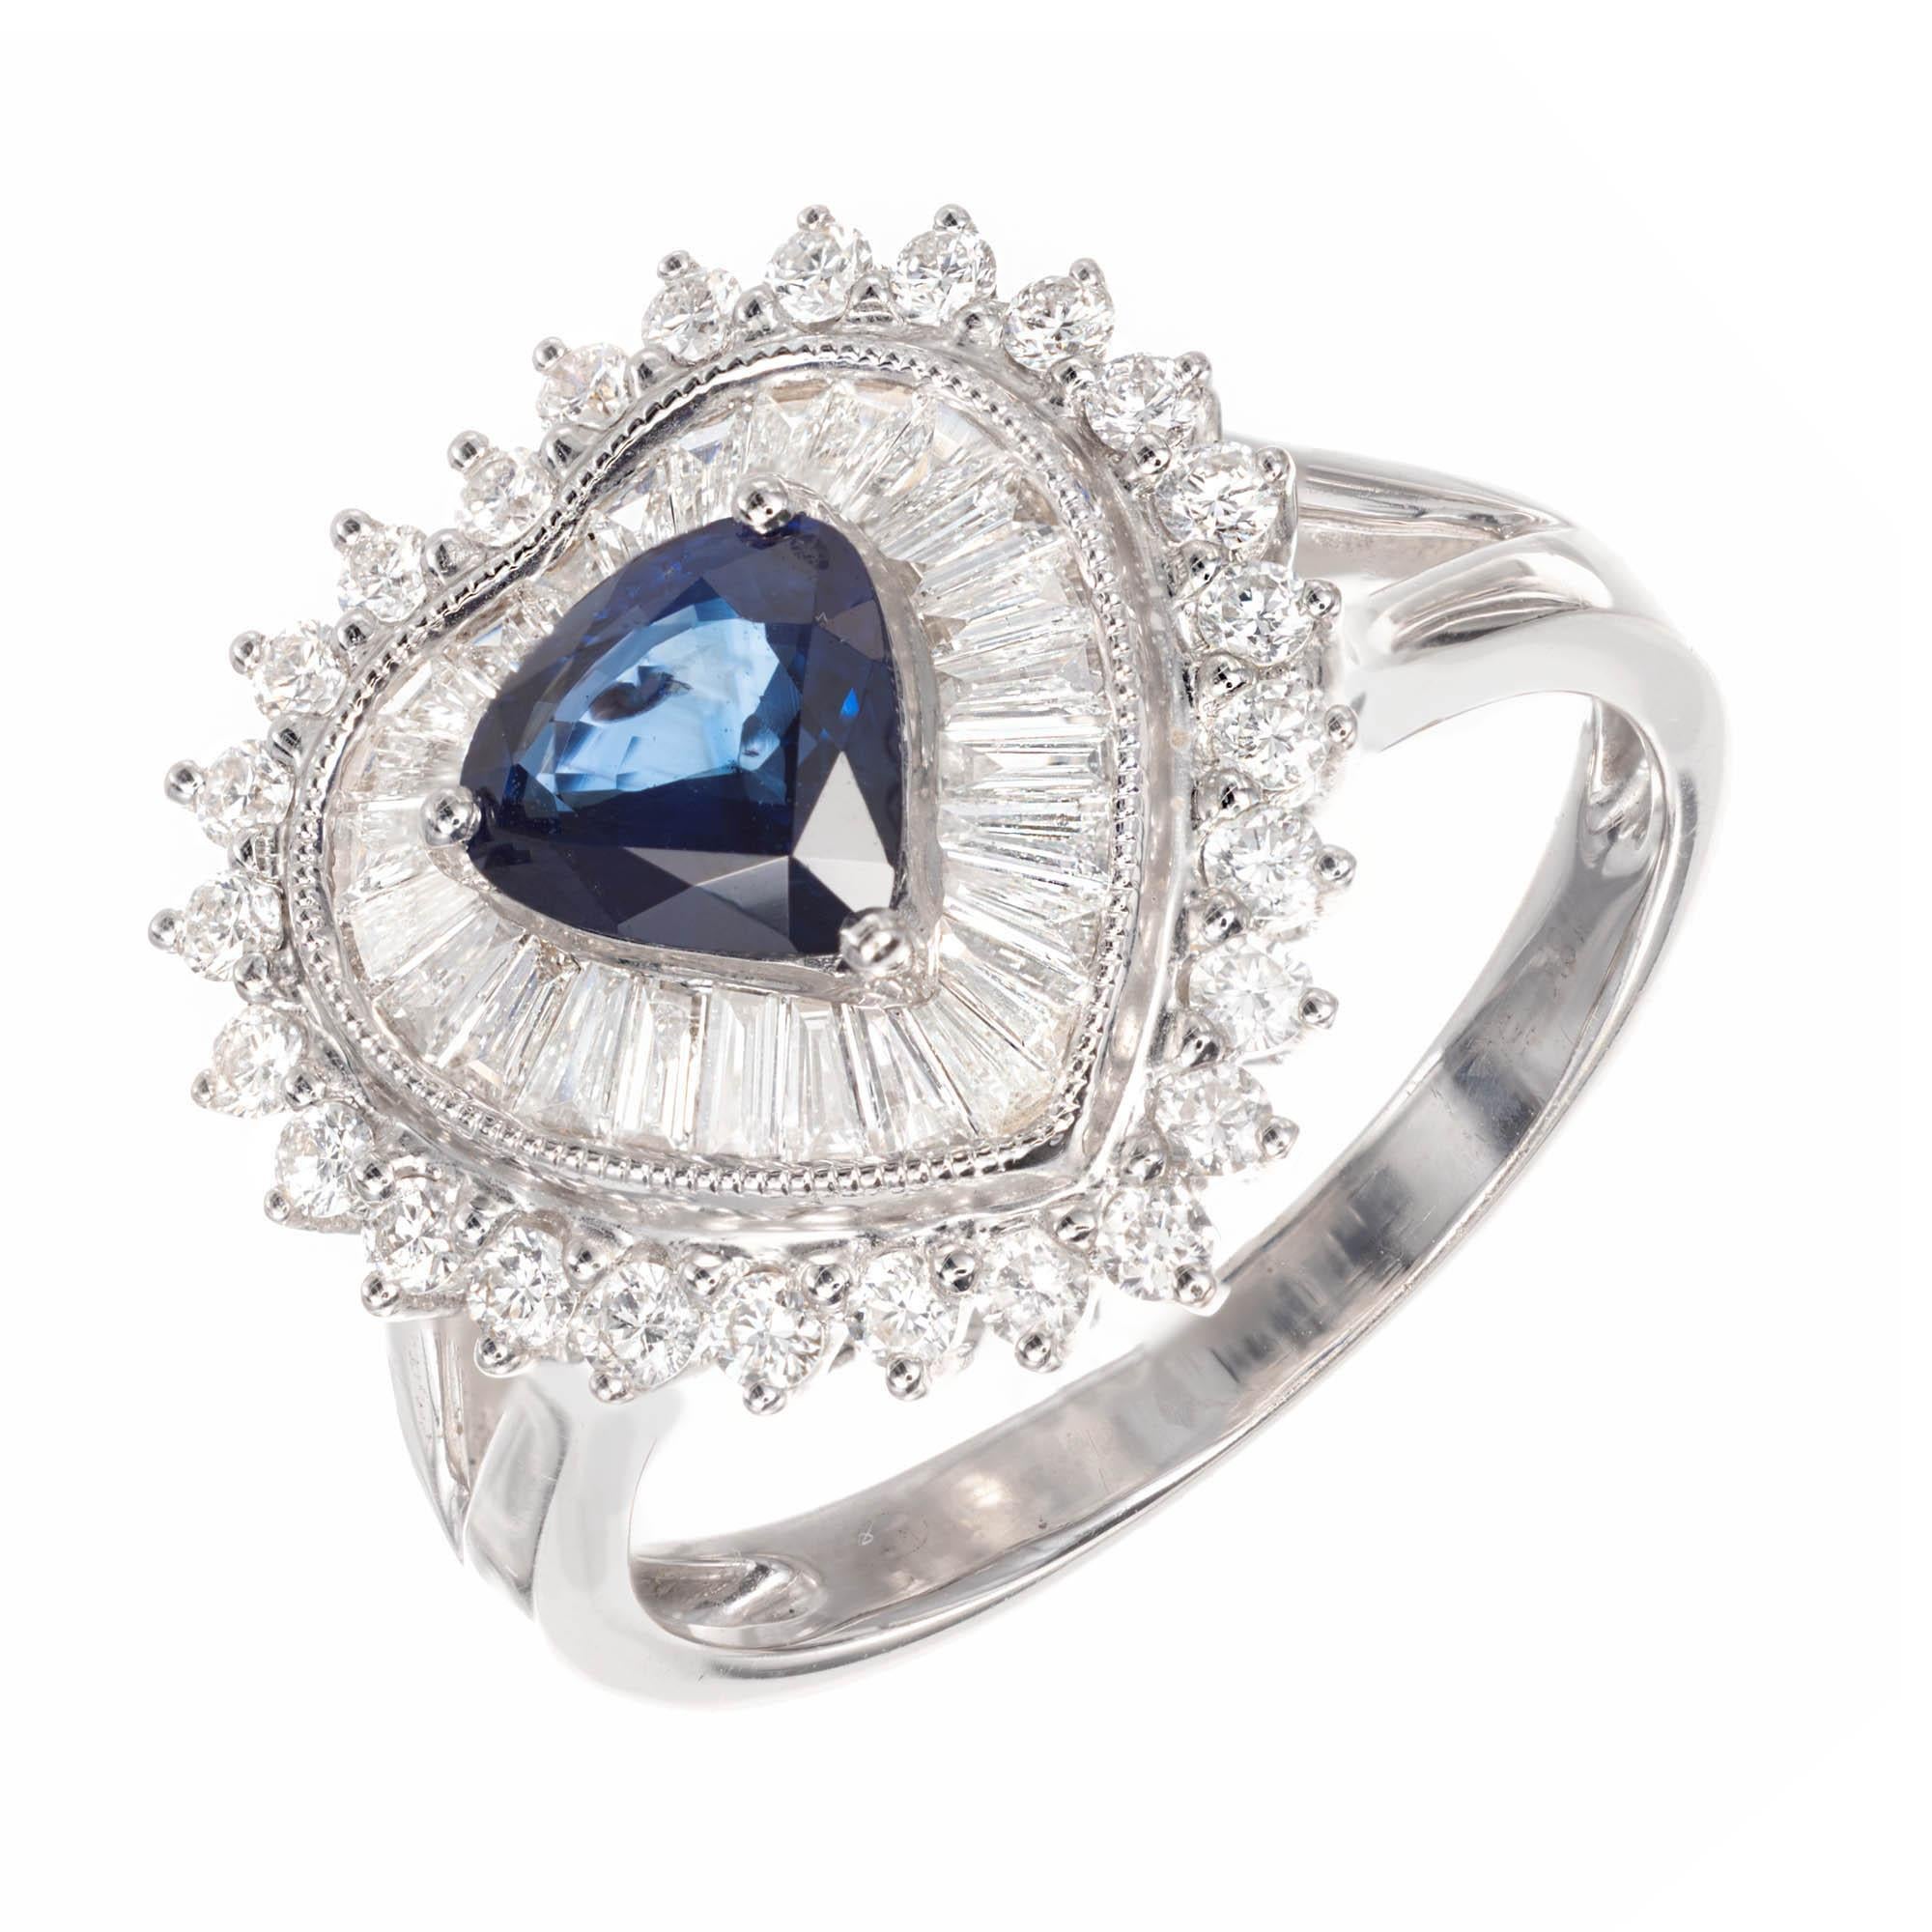 Sapphire and diamond cluster cocktail ring. Pear shape Sapphire is set center stage with a heart shape bezel surrounding Sapphire with tapered baguette Diamonds. Finishing with an outer heart shape of prong set round brilliant cut Diamonds.

1 pear